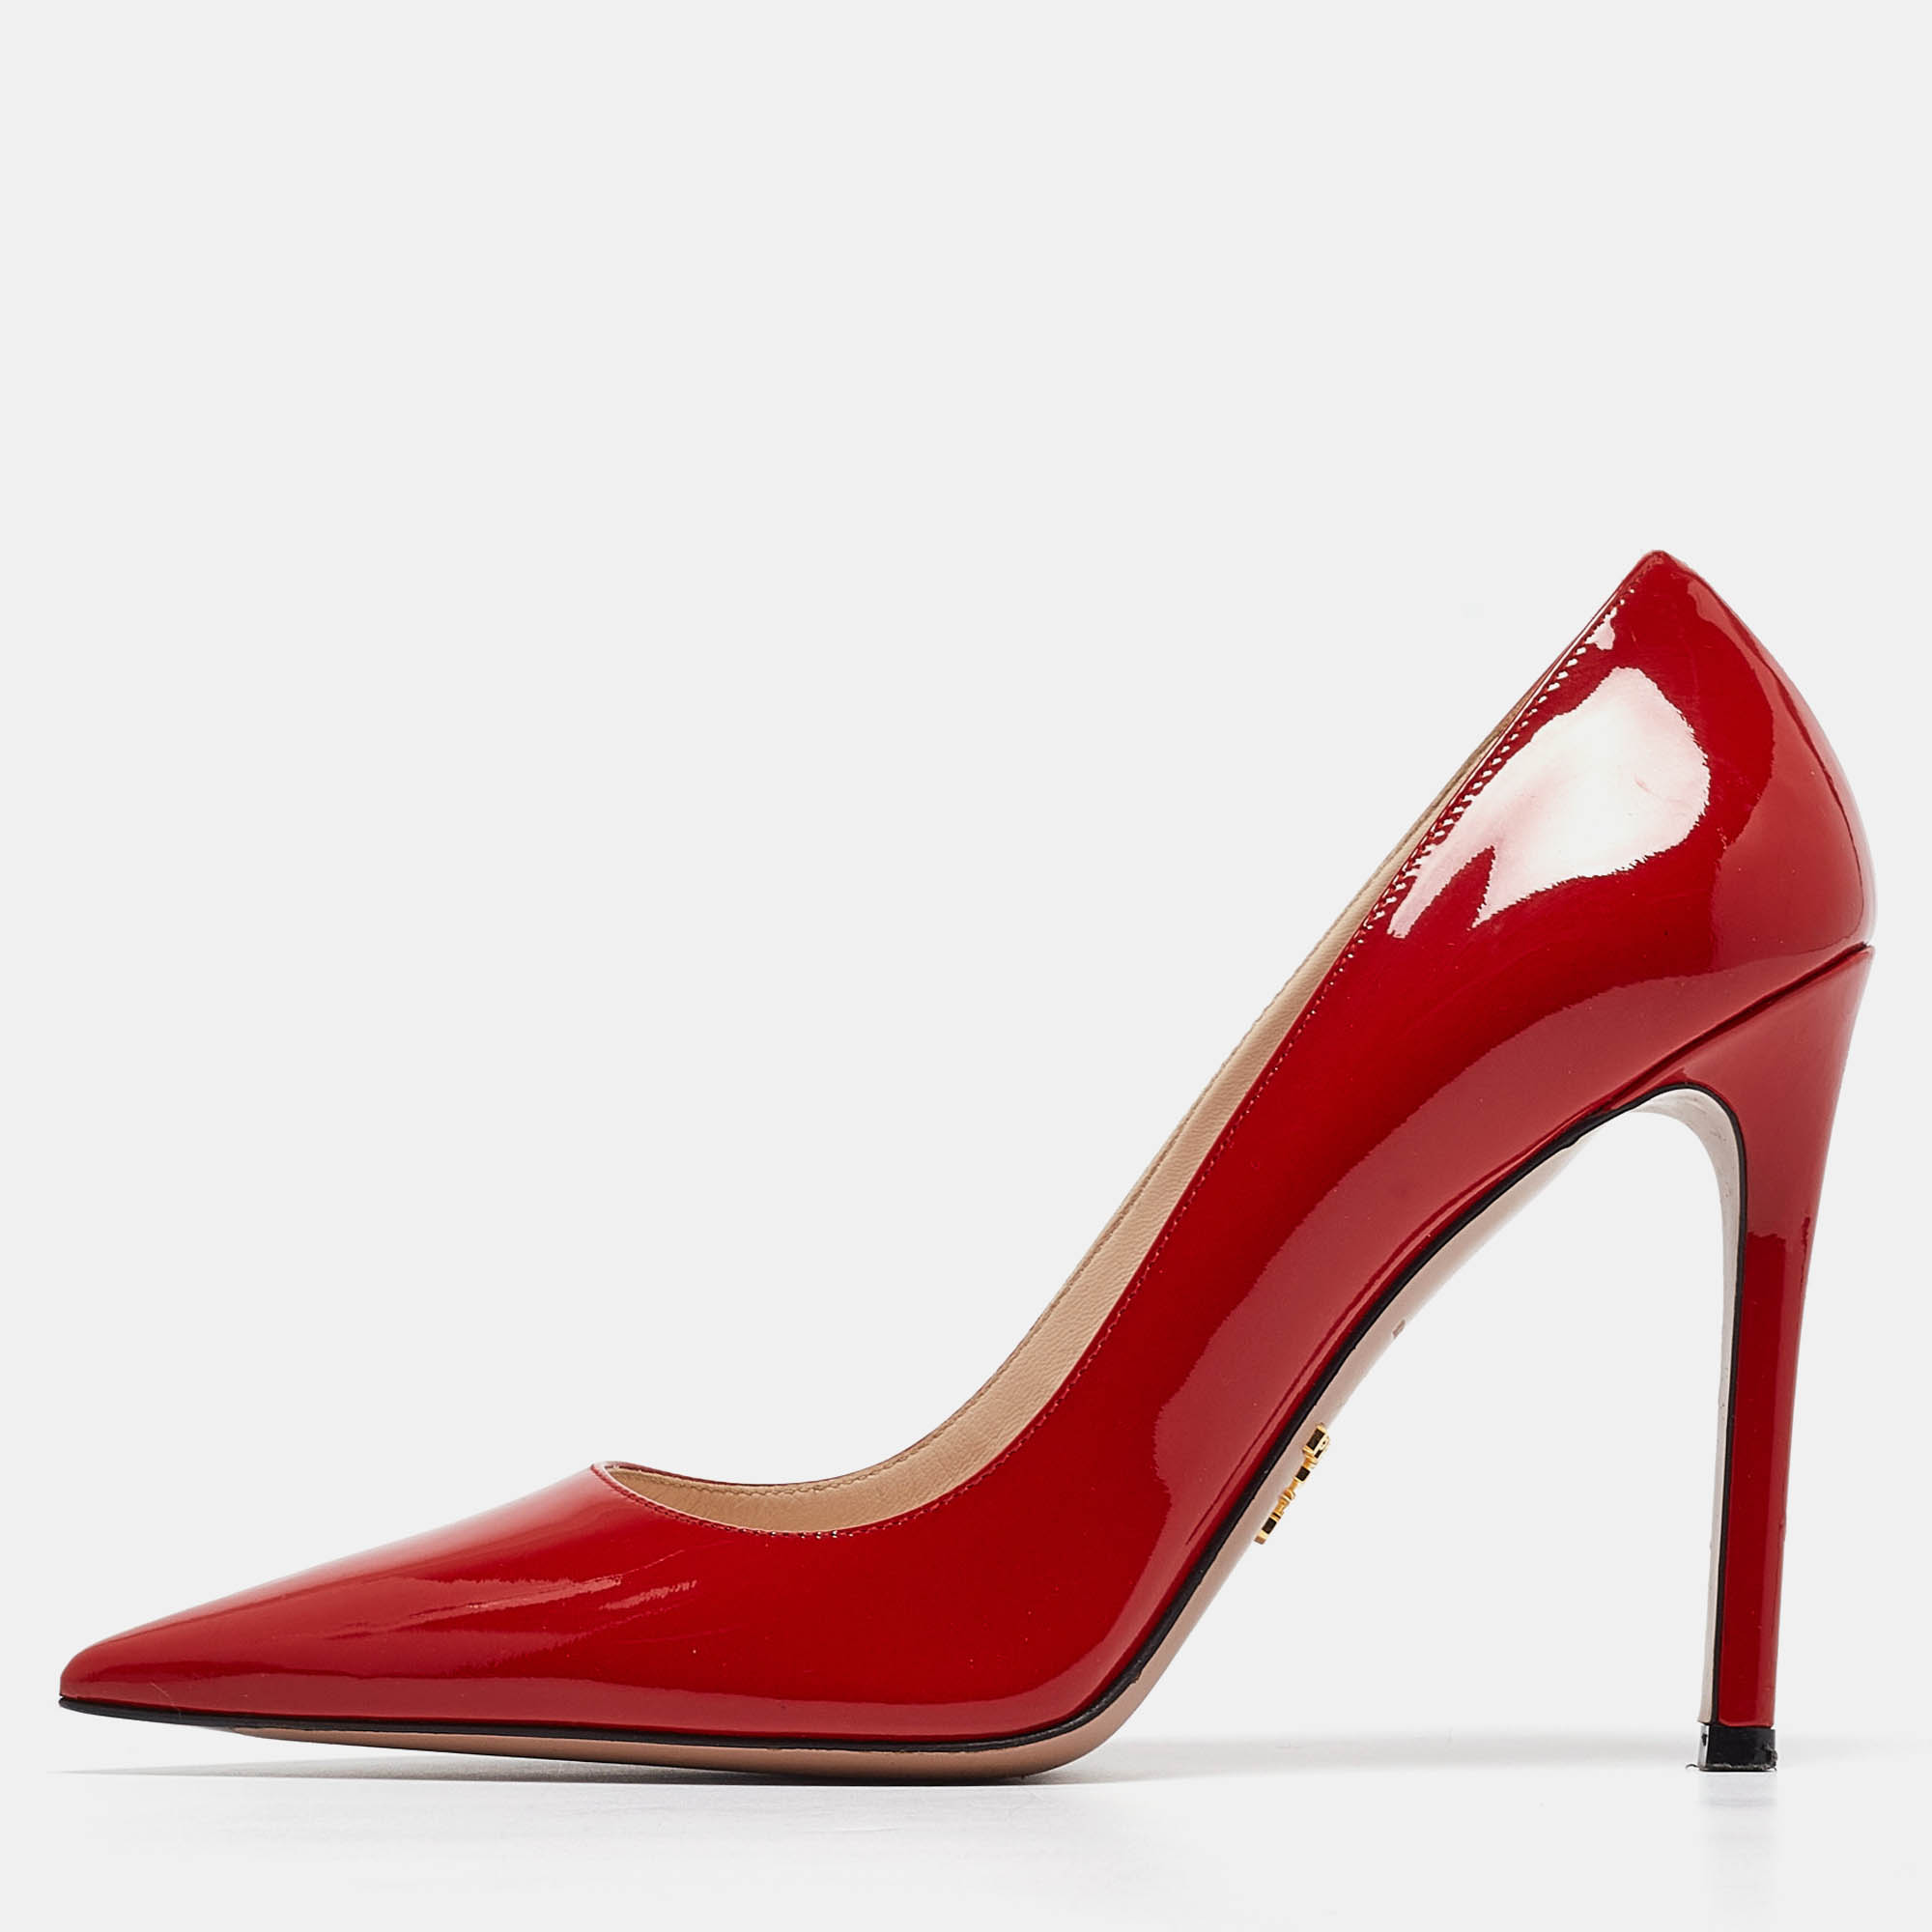 Prada red patent leather pointed toe pumps size 36.5